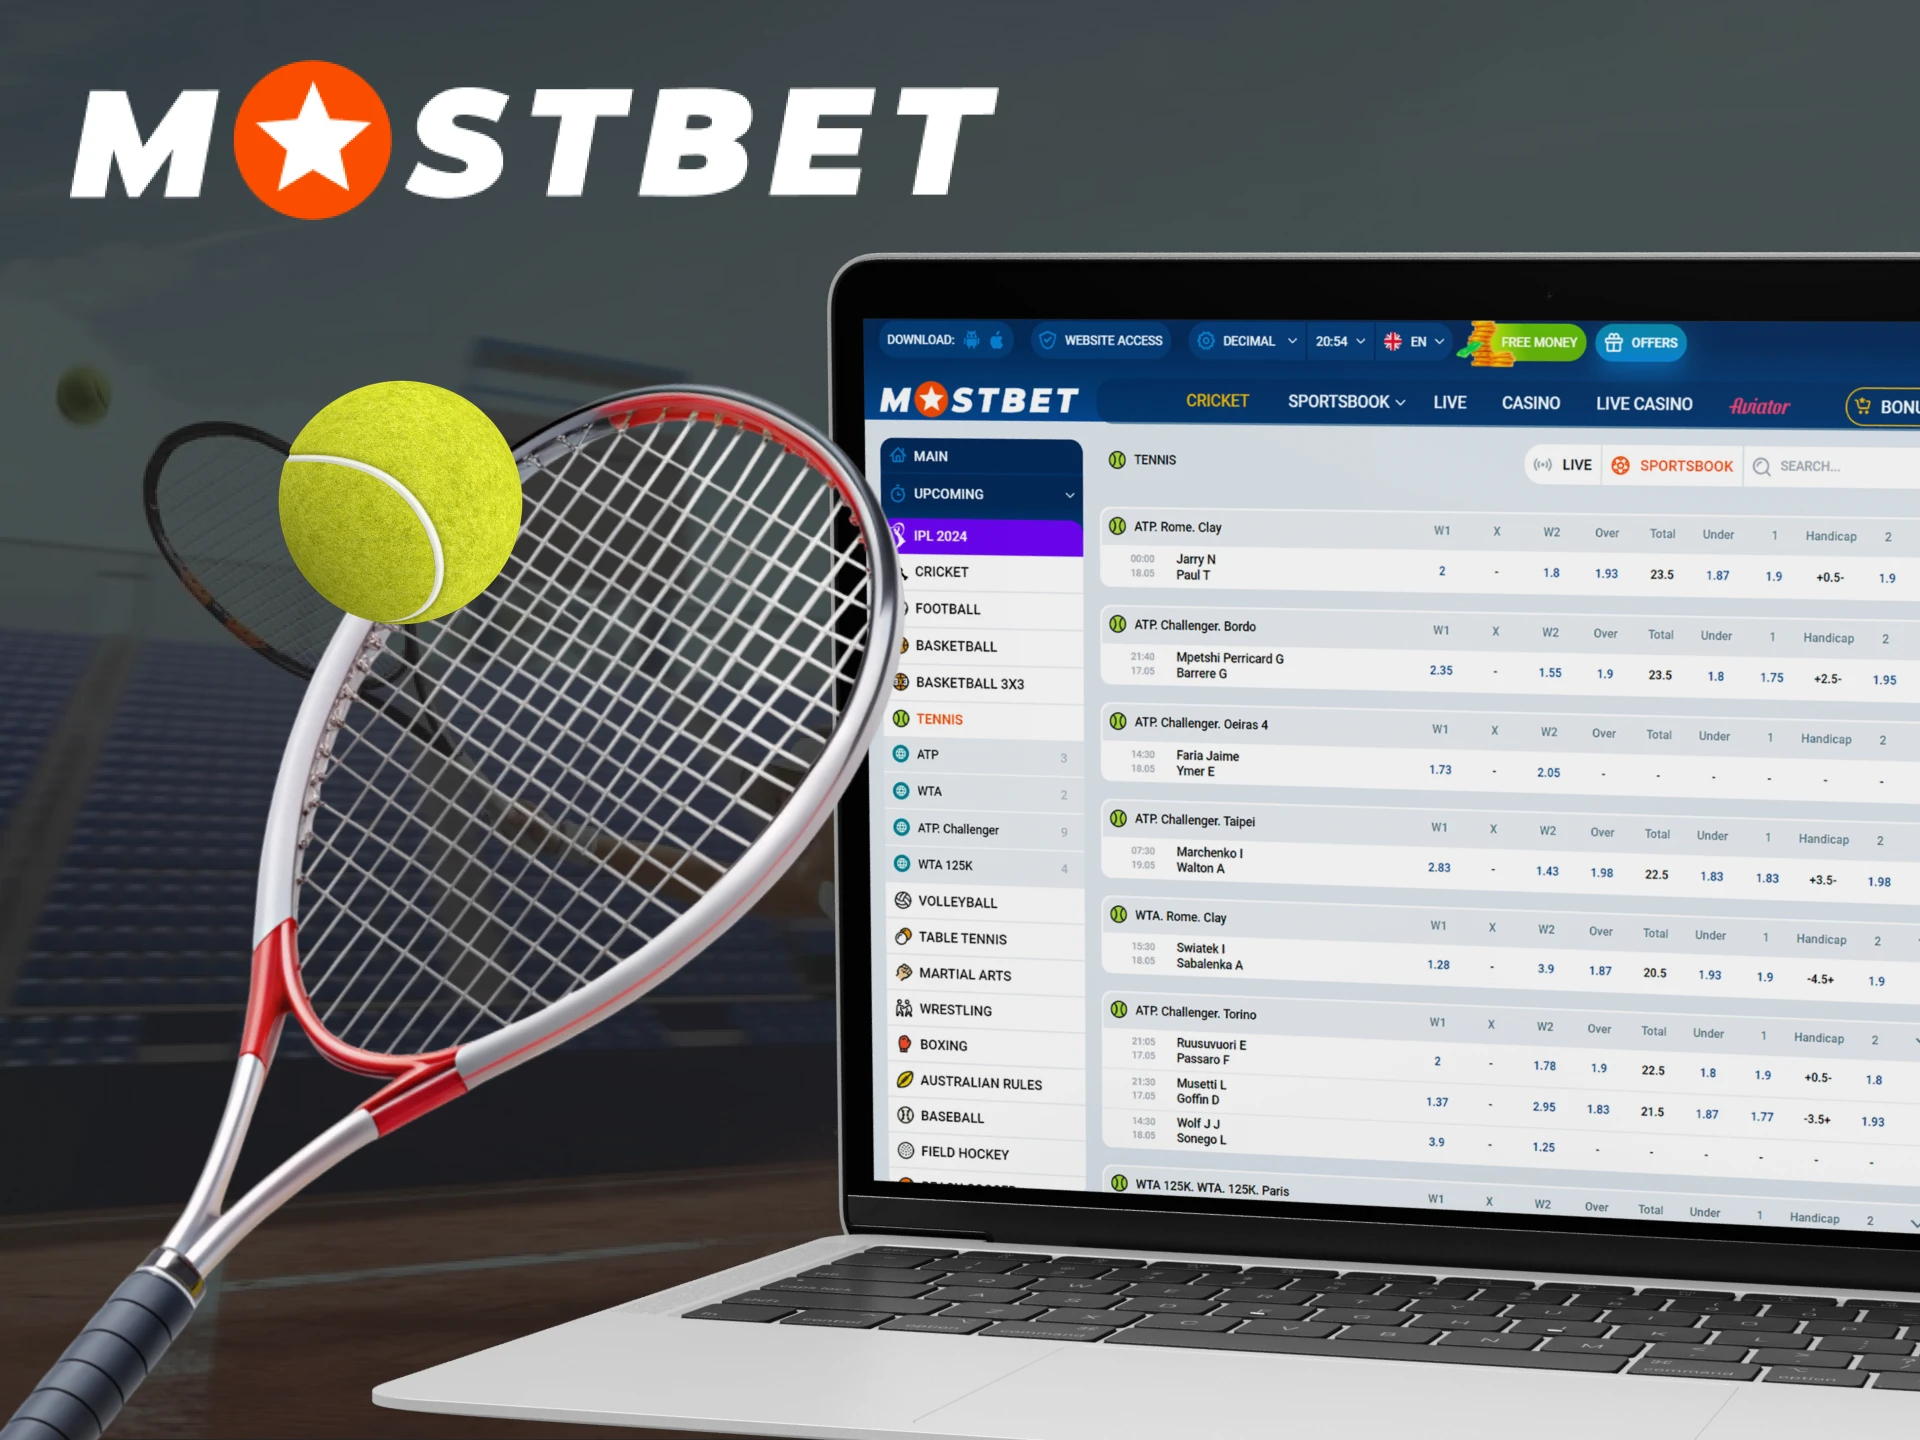 Mostbet offers high odds for tennis betting.